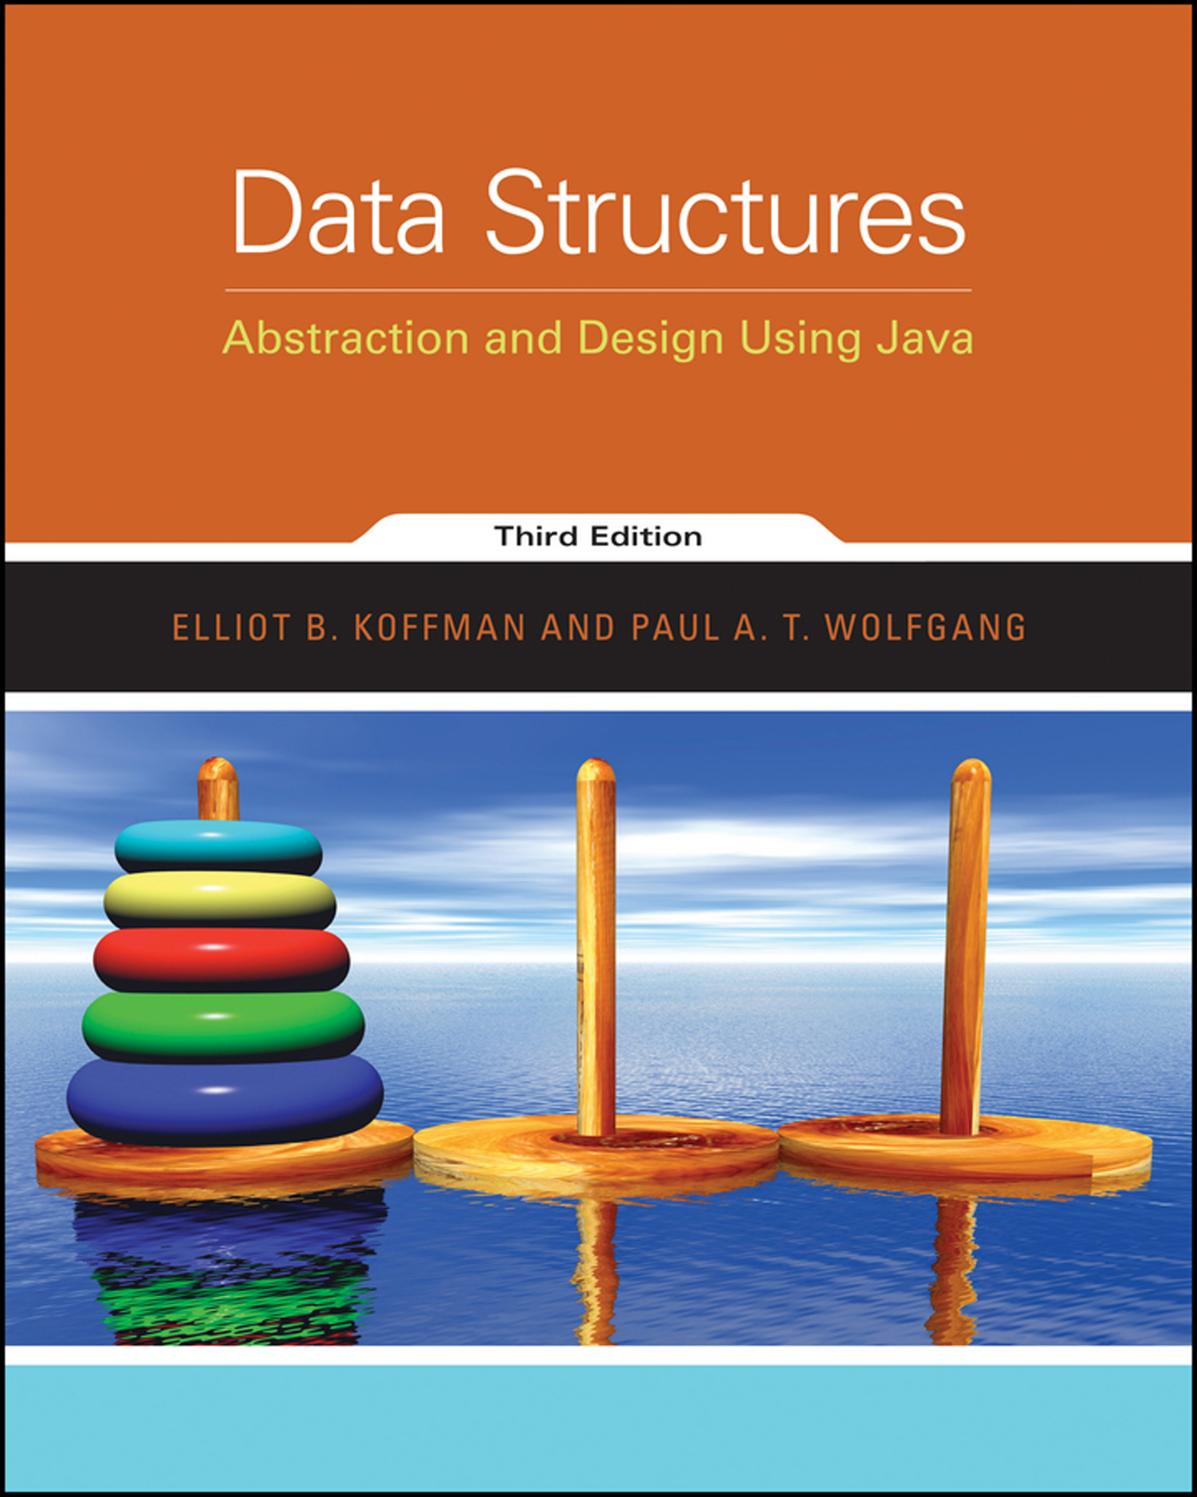 Data structures abstraction and design using Java 3rd Edition - Elliot B. Koffman.jpg